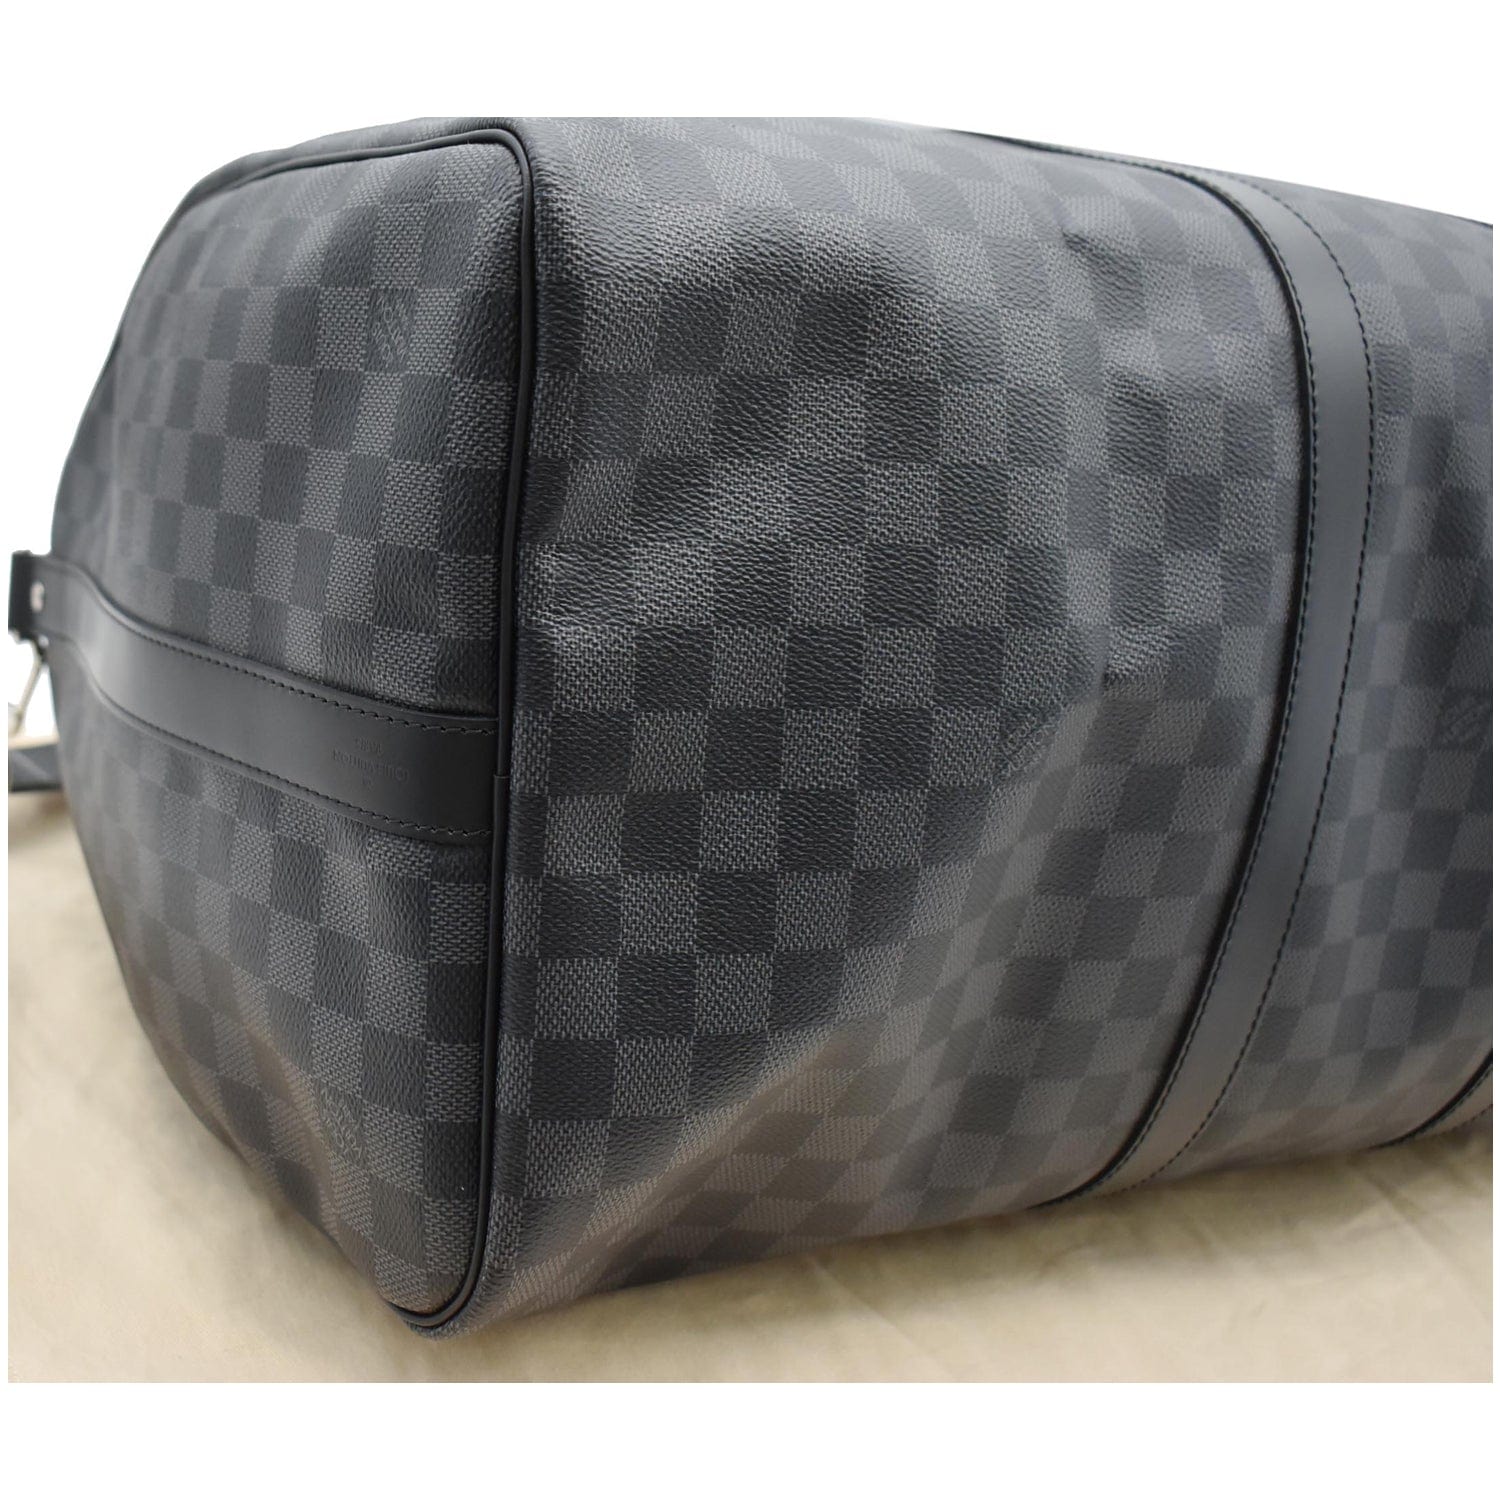 Louis Vuitton Keepall Damier Graphite Bandouliere 55 with Strap 872889  Black Coated Canvas Weekend/Travel Bag, Louis Vuitton